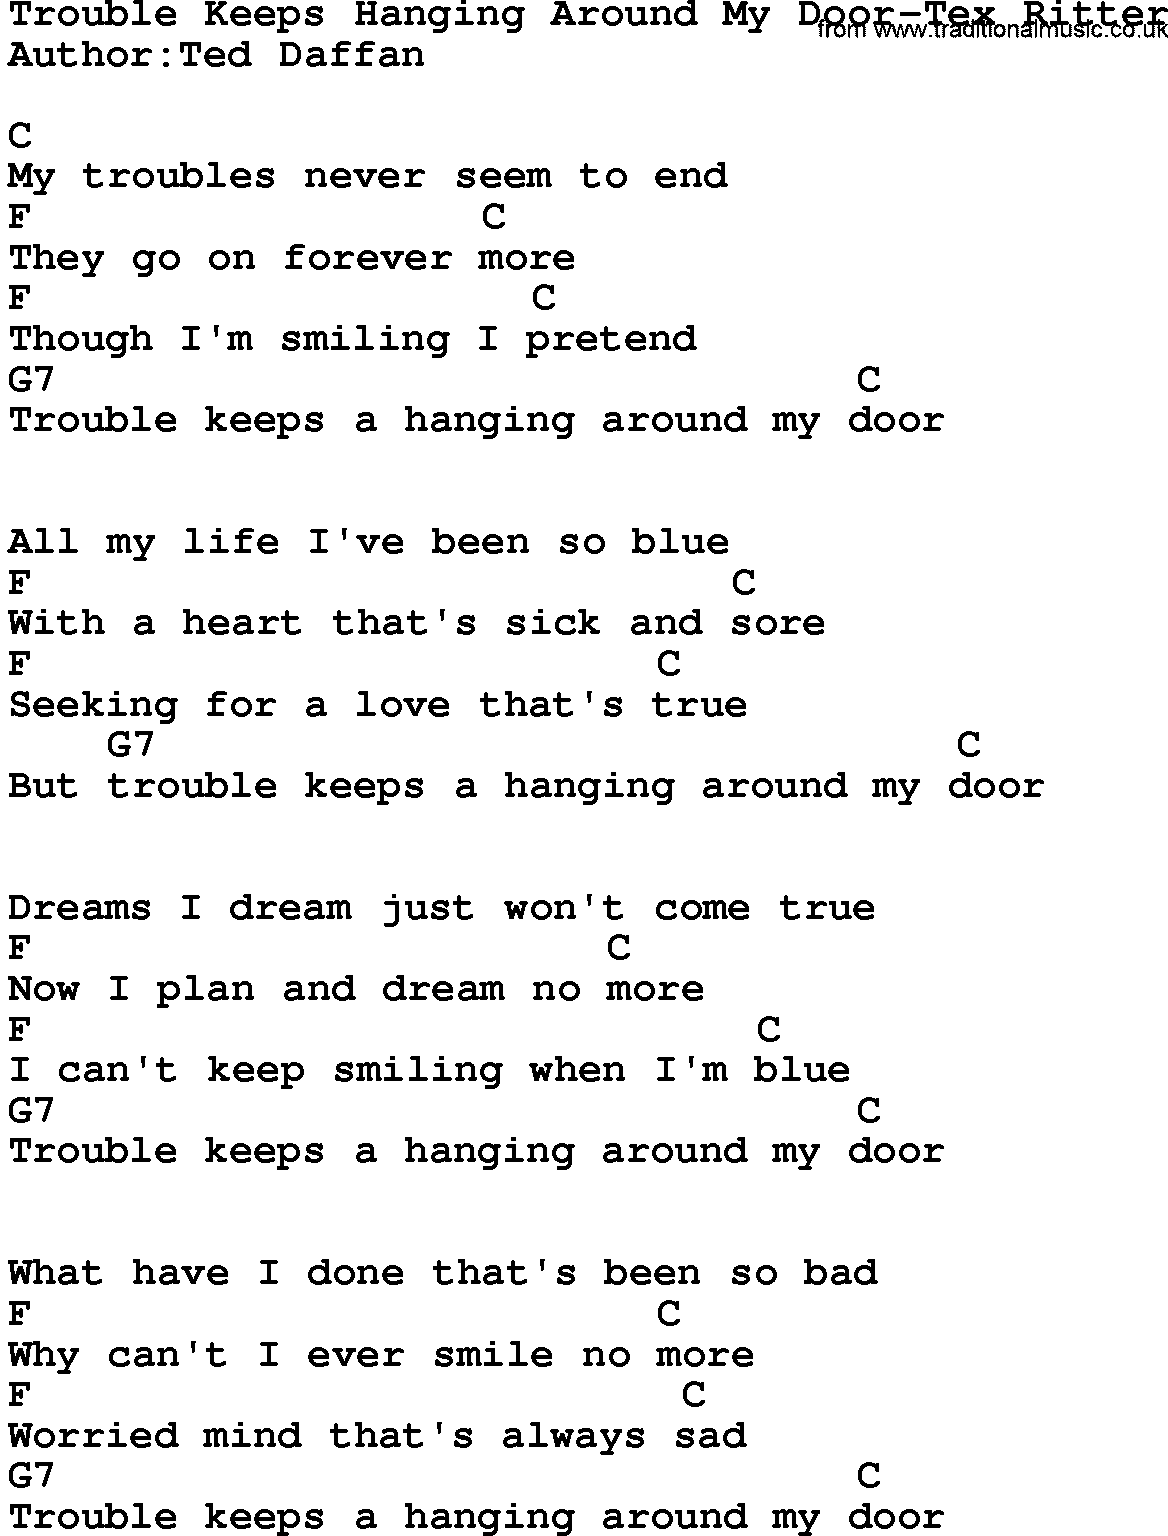 Country music song: Trouble Keeps Hanging Around My Door-Tex Ritter lyrics and chords